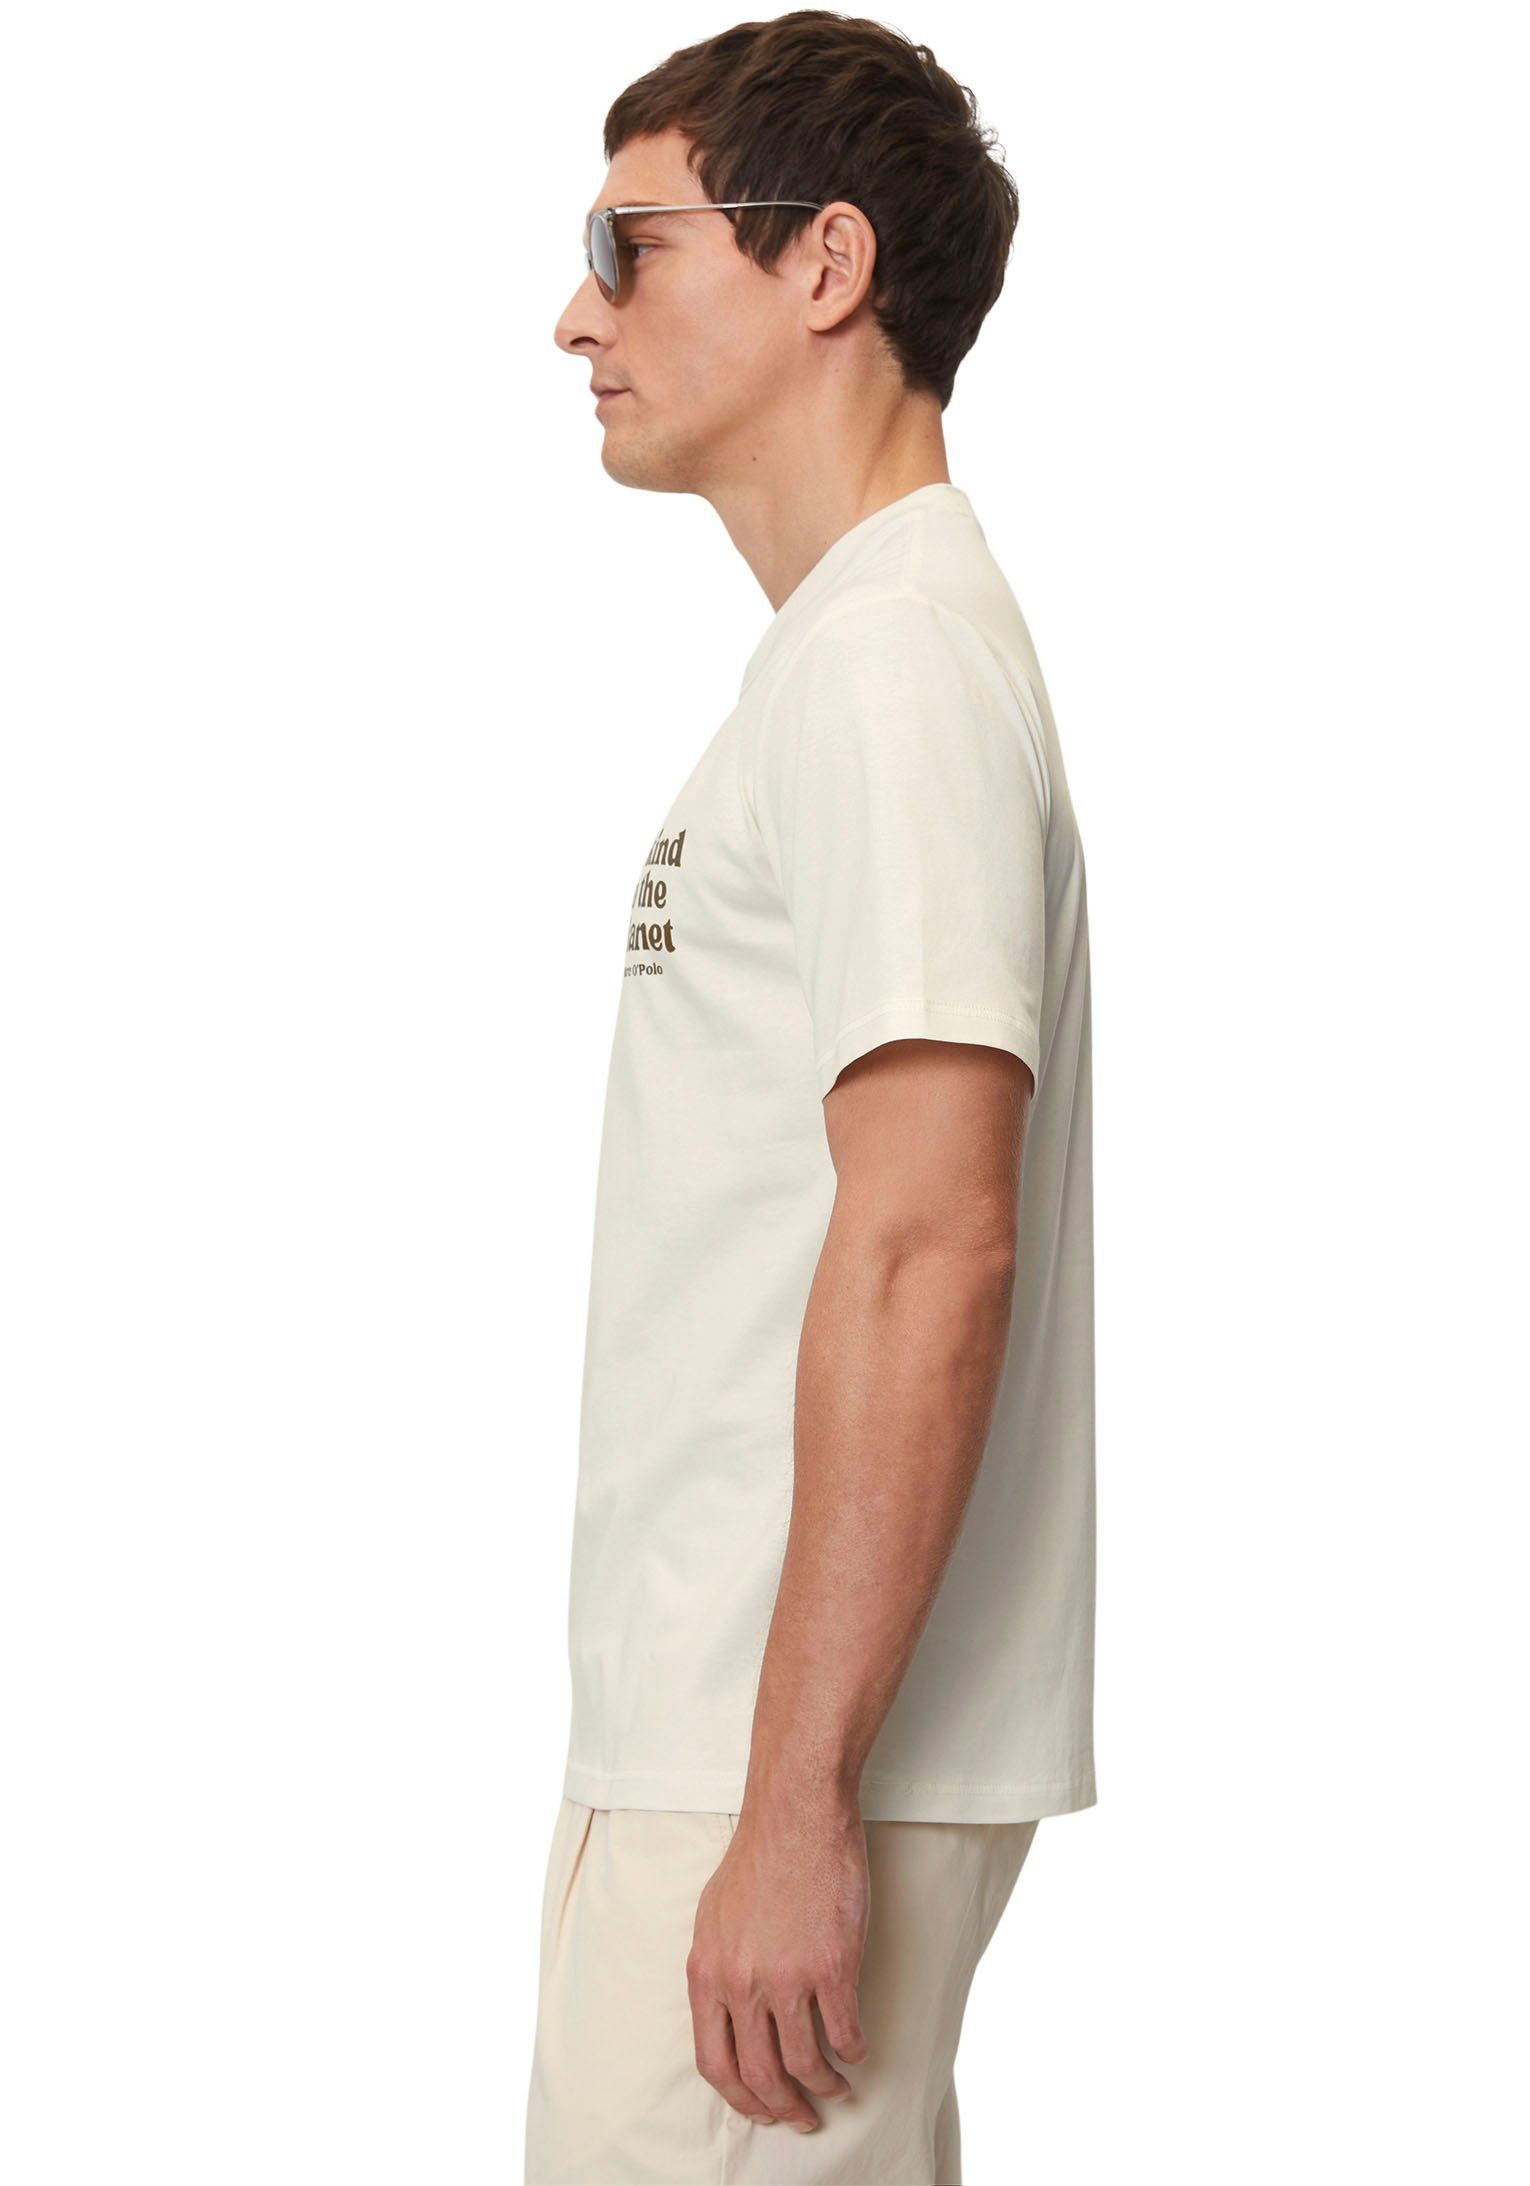 Marc O'Polo T-Shirt mit in Statement-Print Brusthöhe altweiss